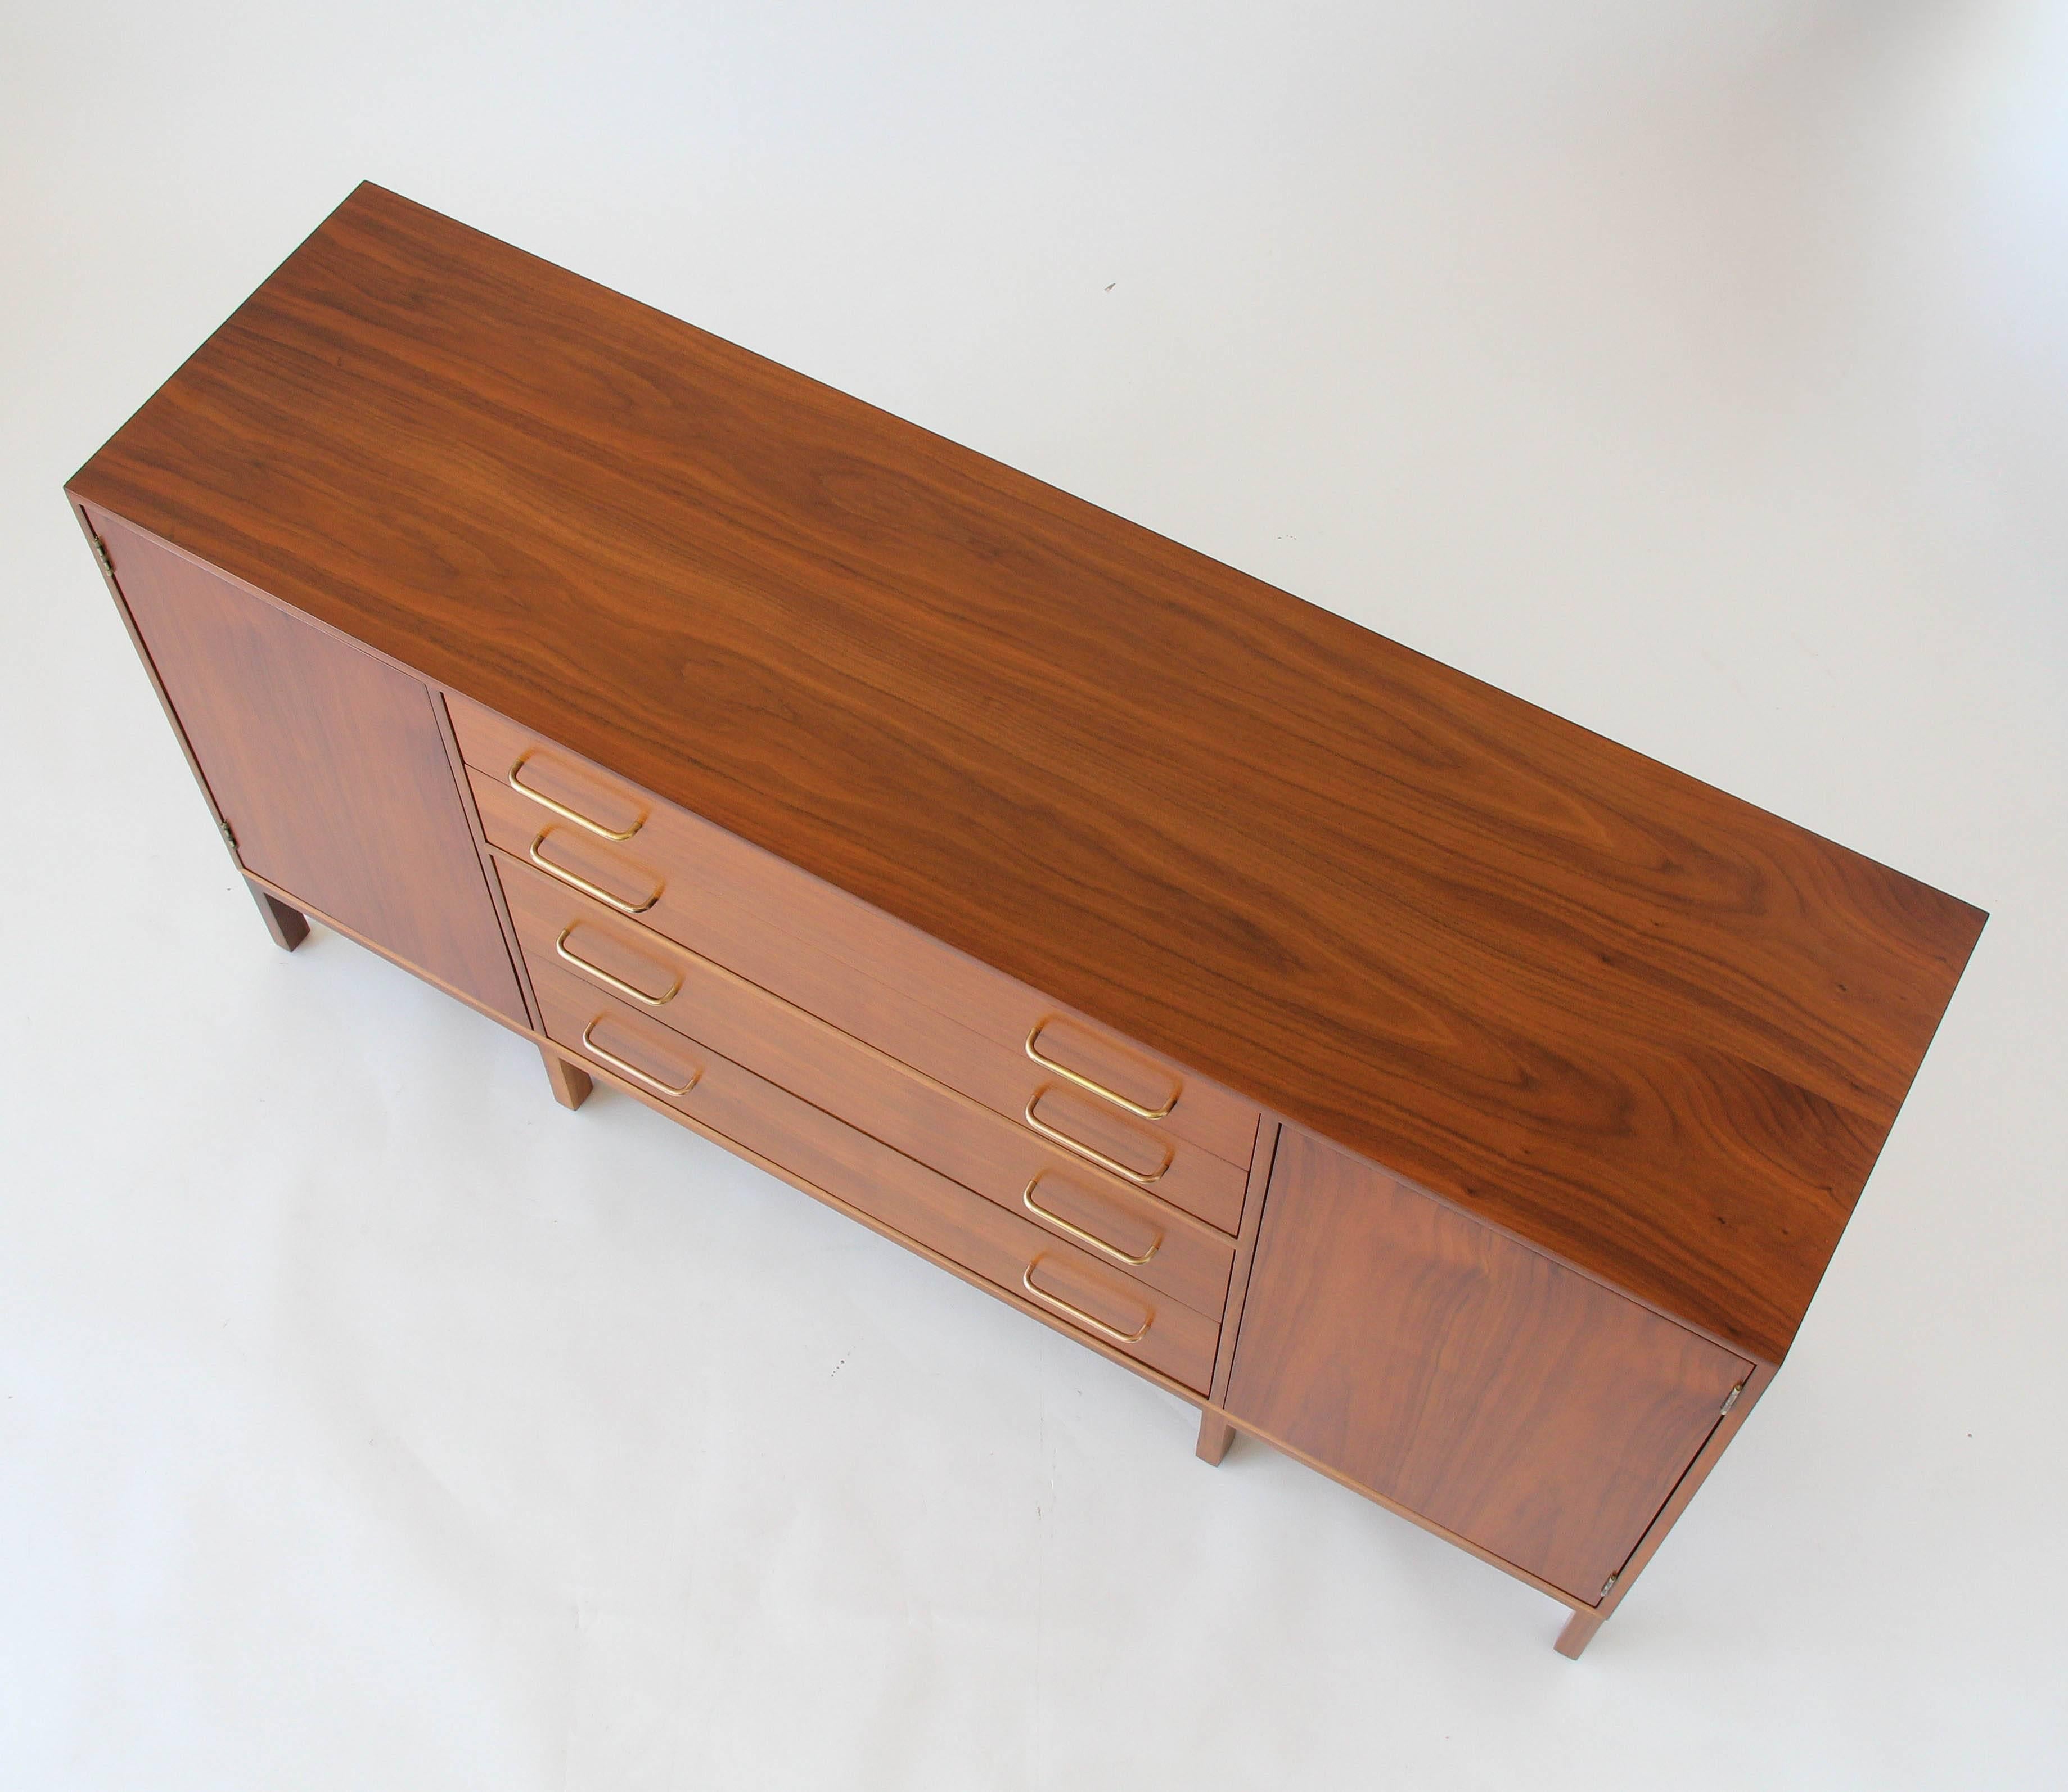 Polished Sideboard in Mahogany and Brass by Edward Wormley for Dunbar